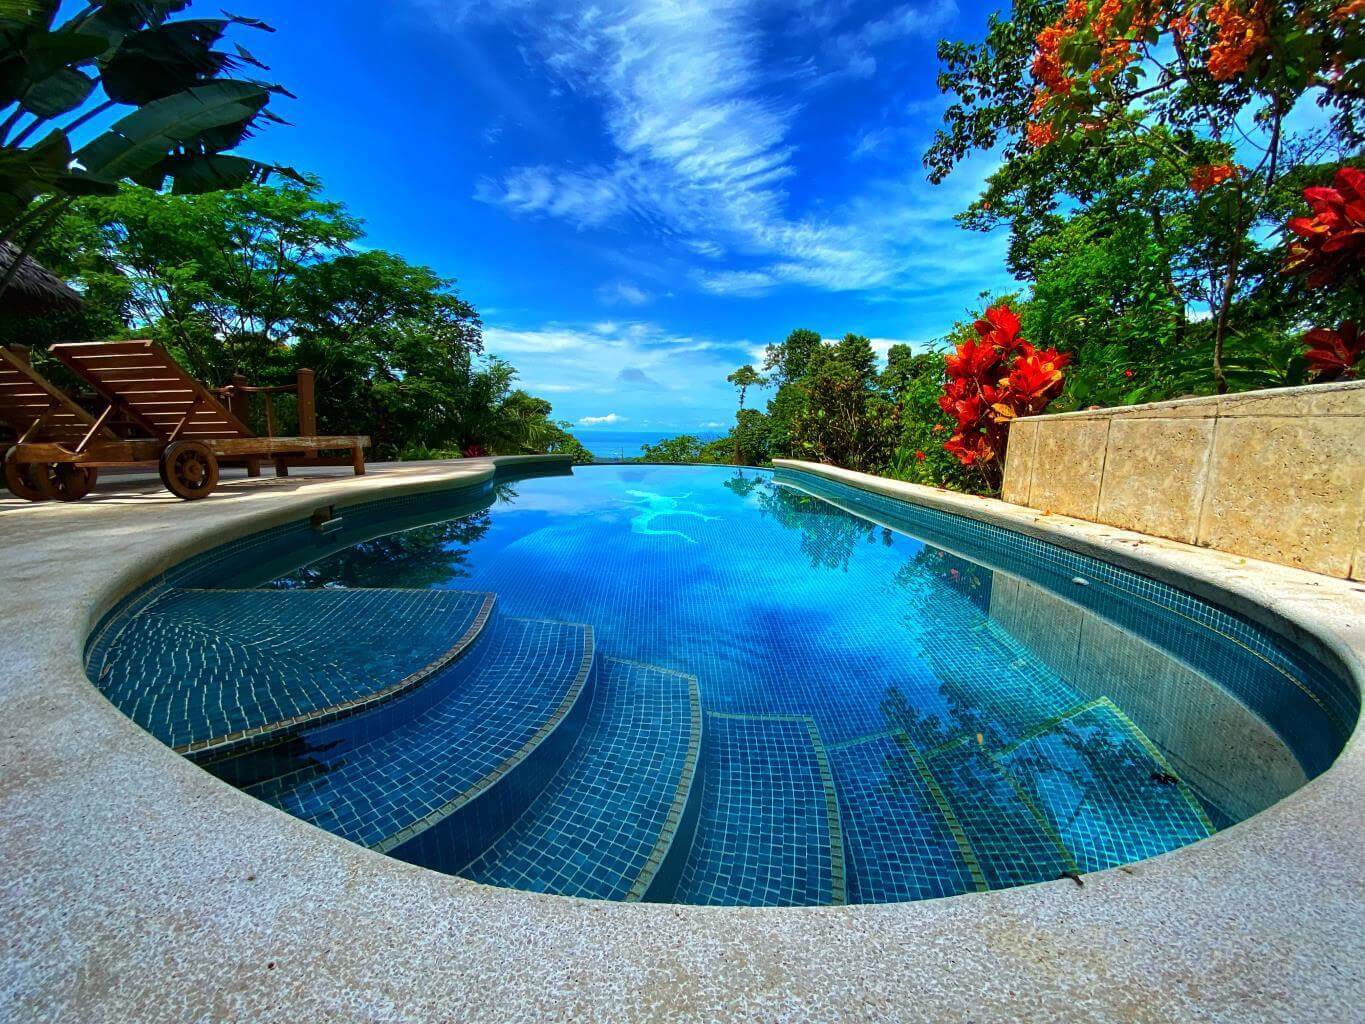 Secluded Villa Surrounded by Nature with Lovely Pool